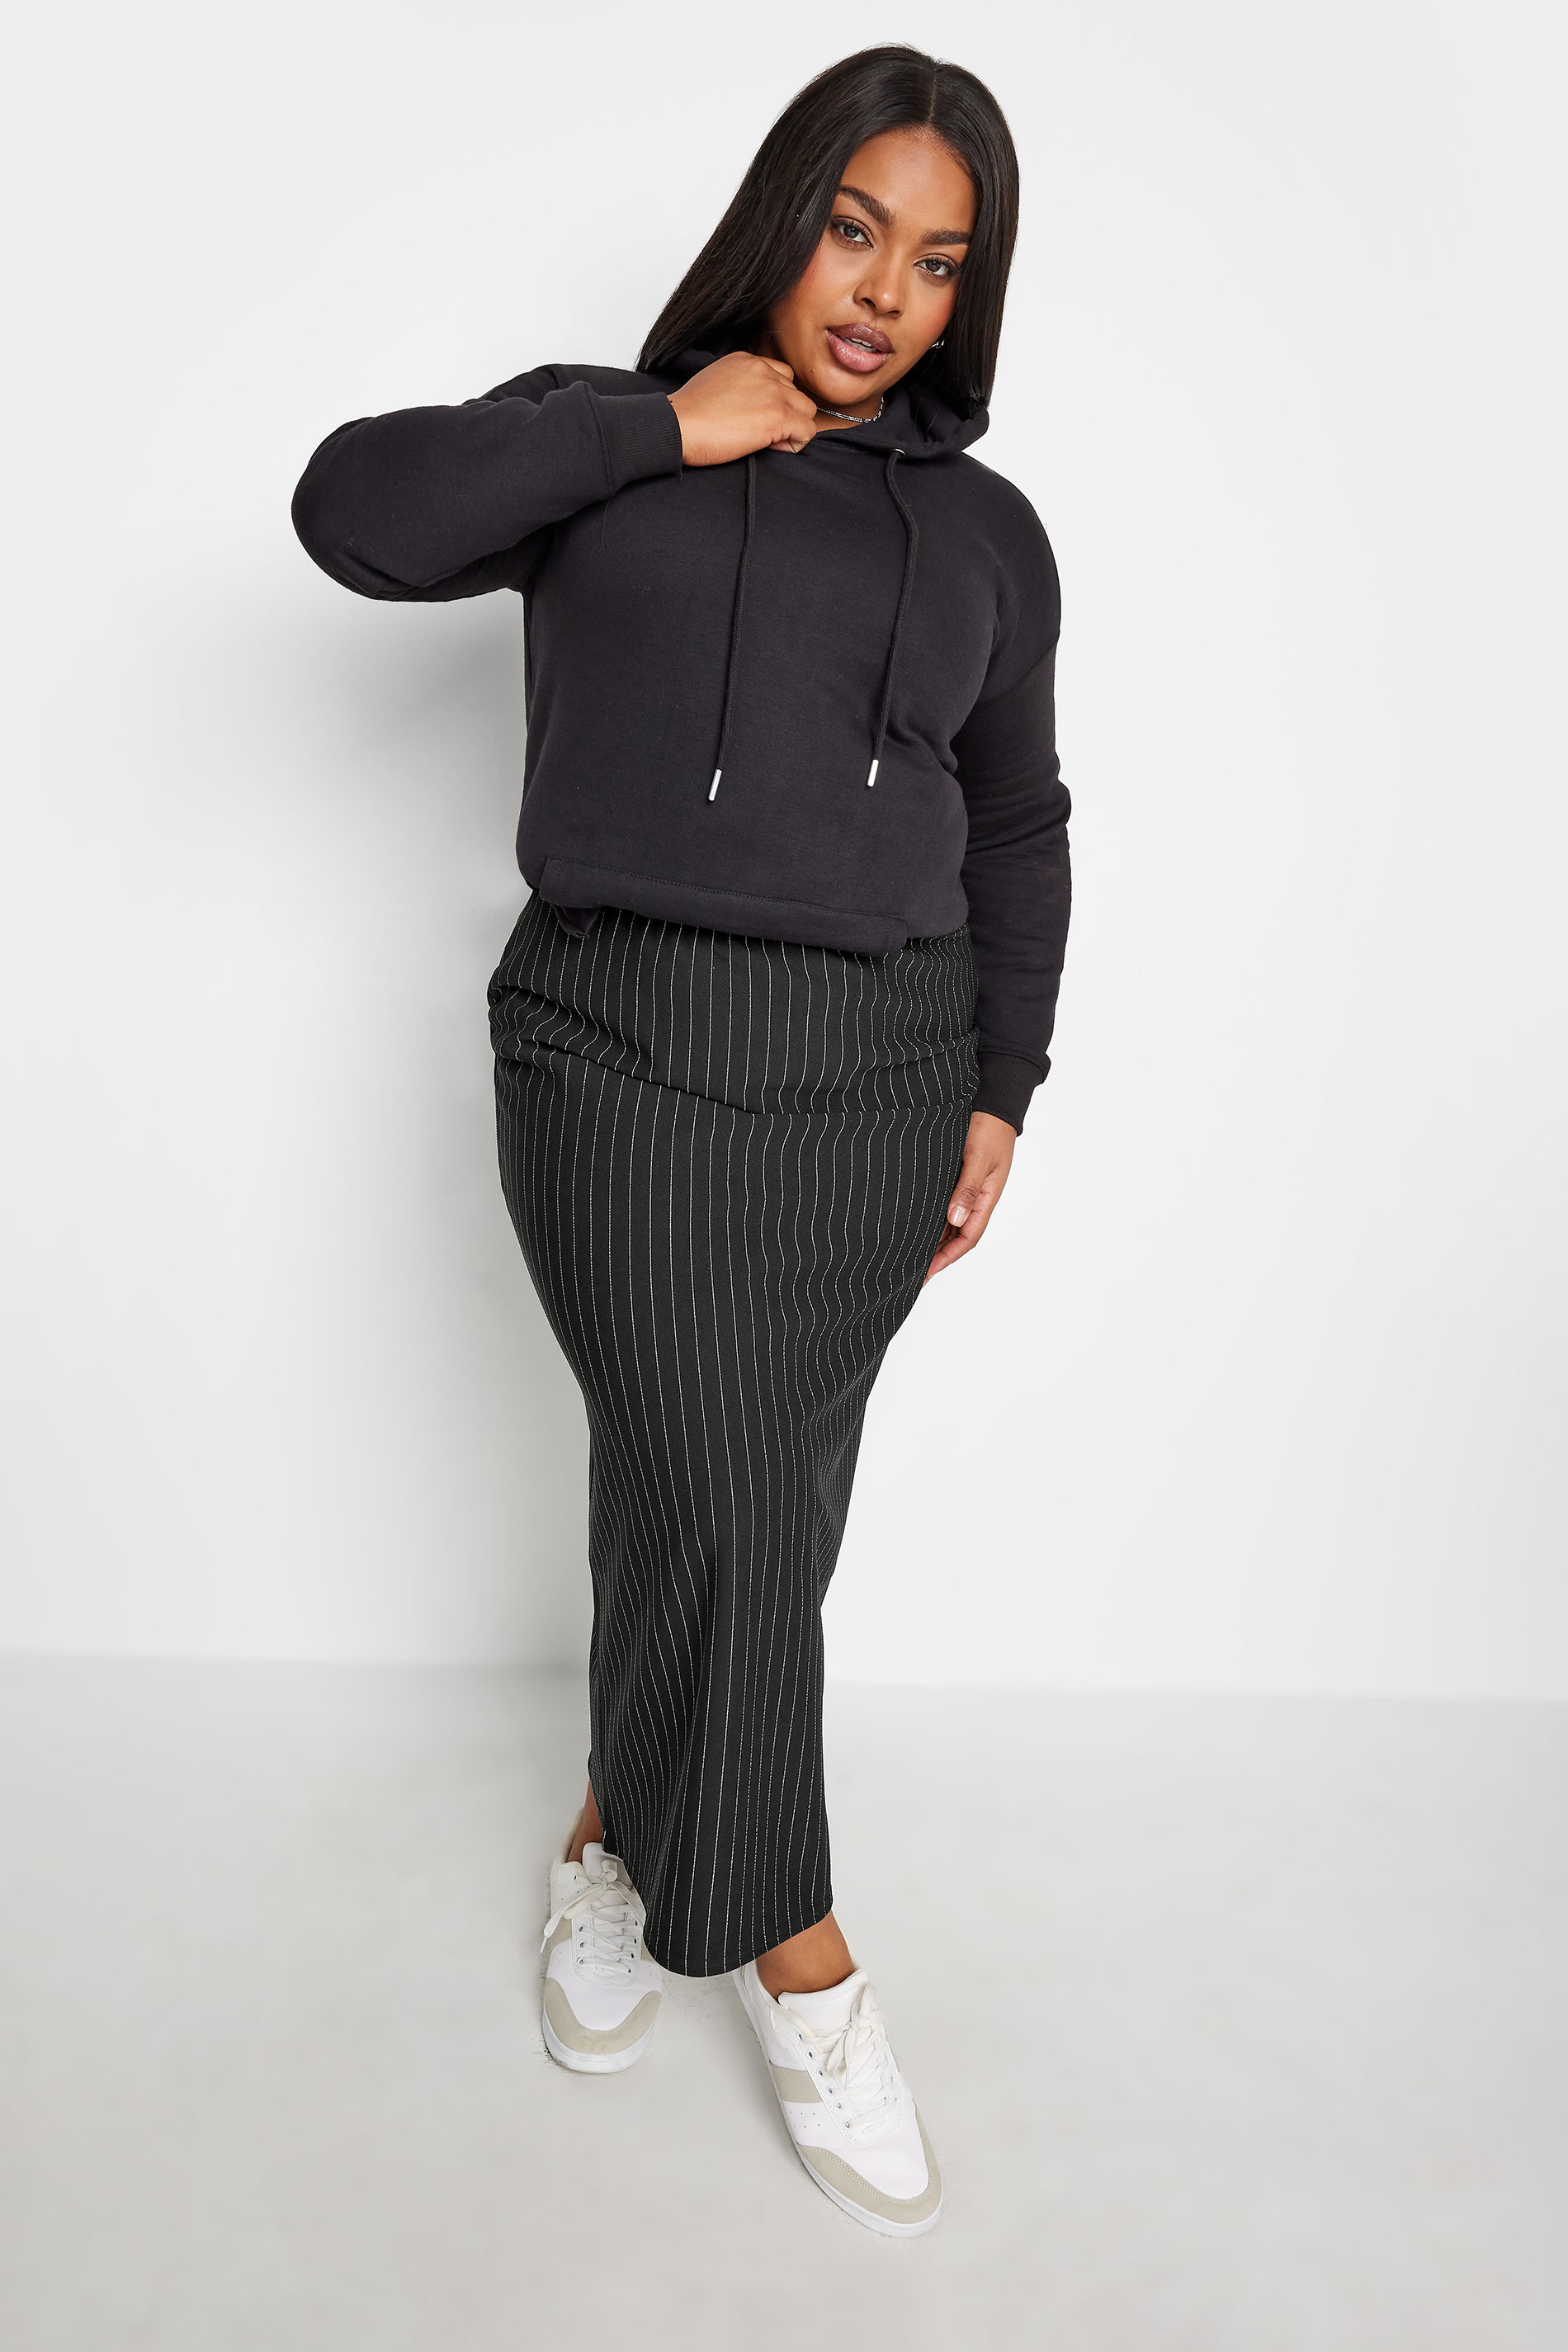 LIMITED COLLECTION Plus Size Black Pinstripe Maxi Skirt | Yours Clothing 3